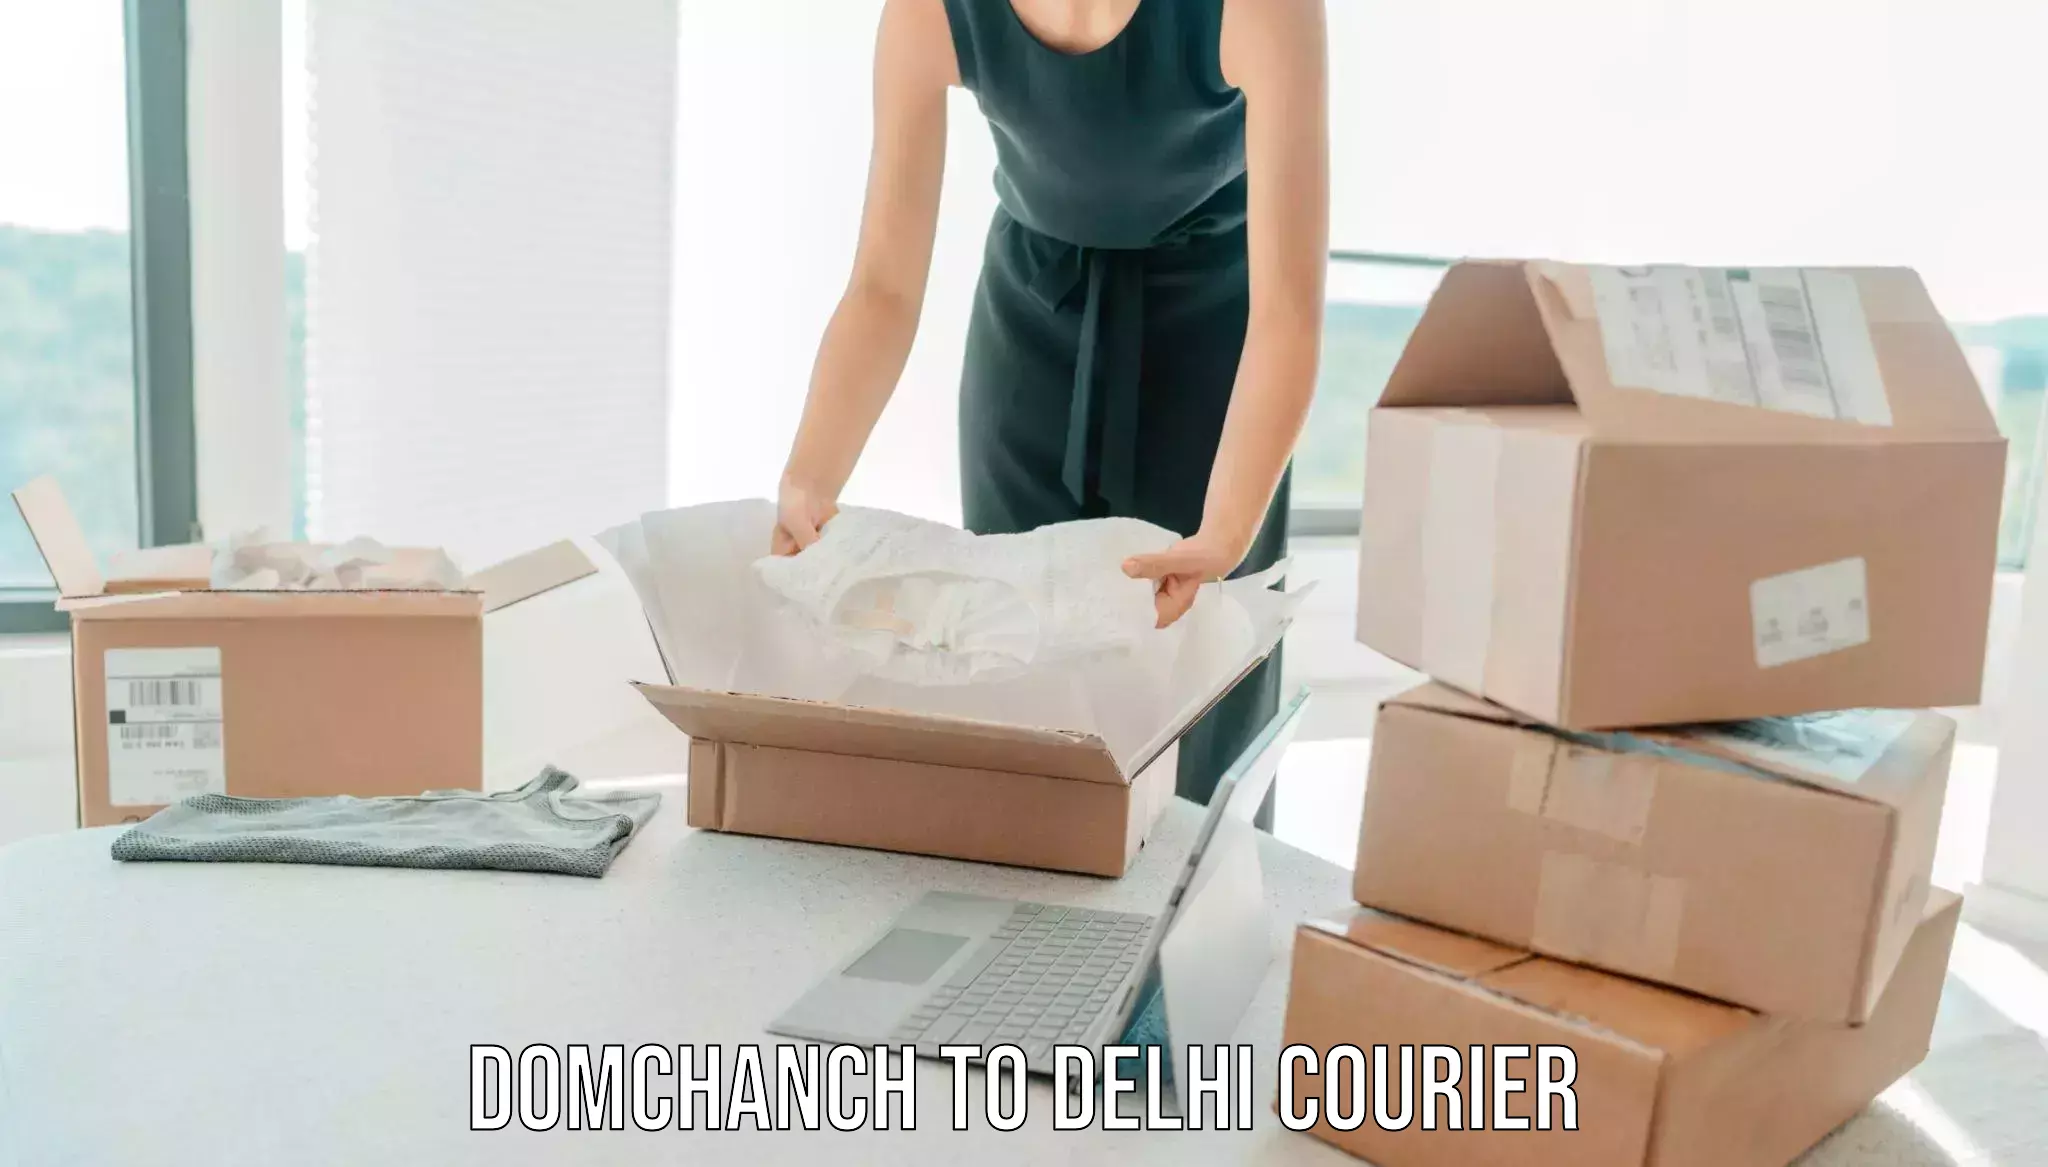 Specialized moving company Domchanch to University of Delhi